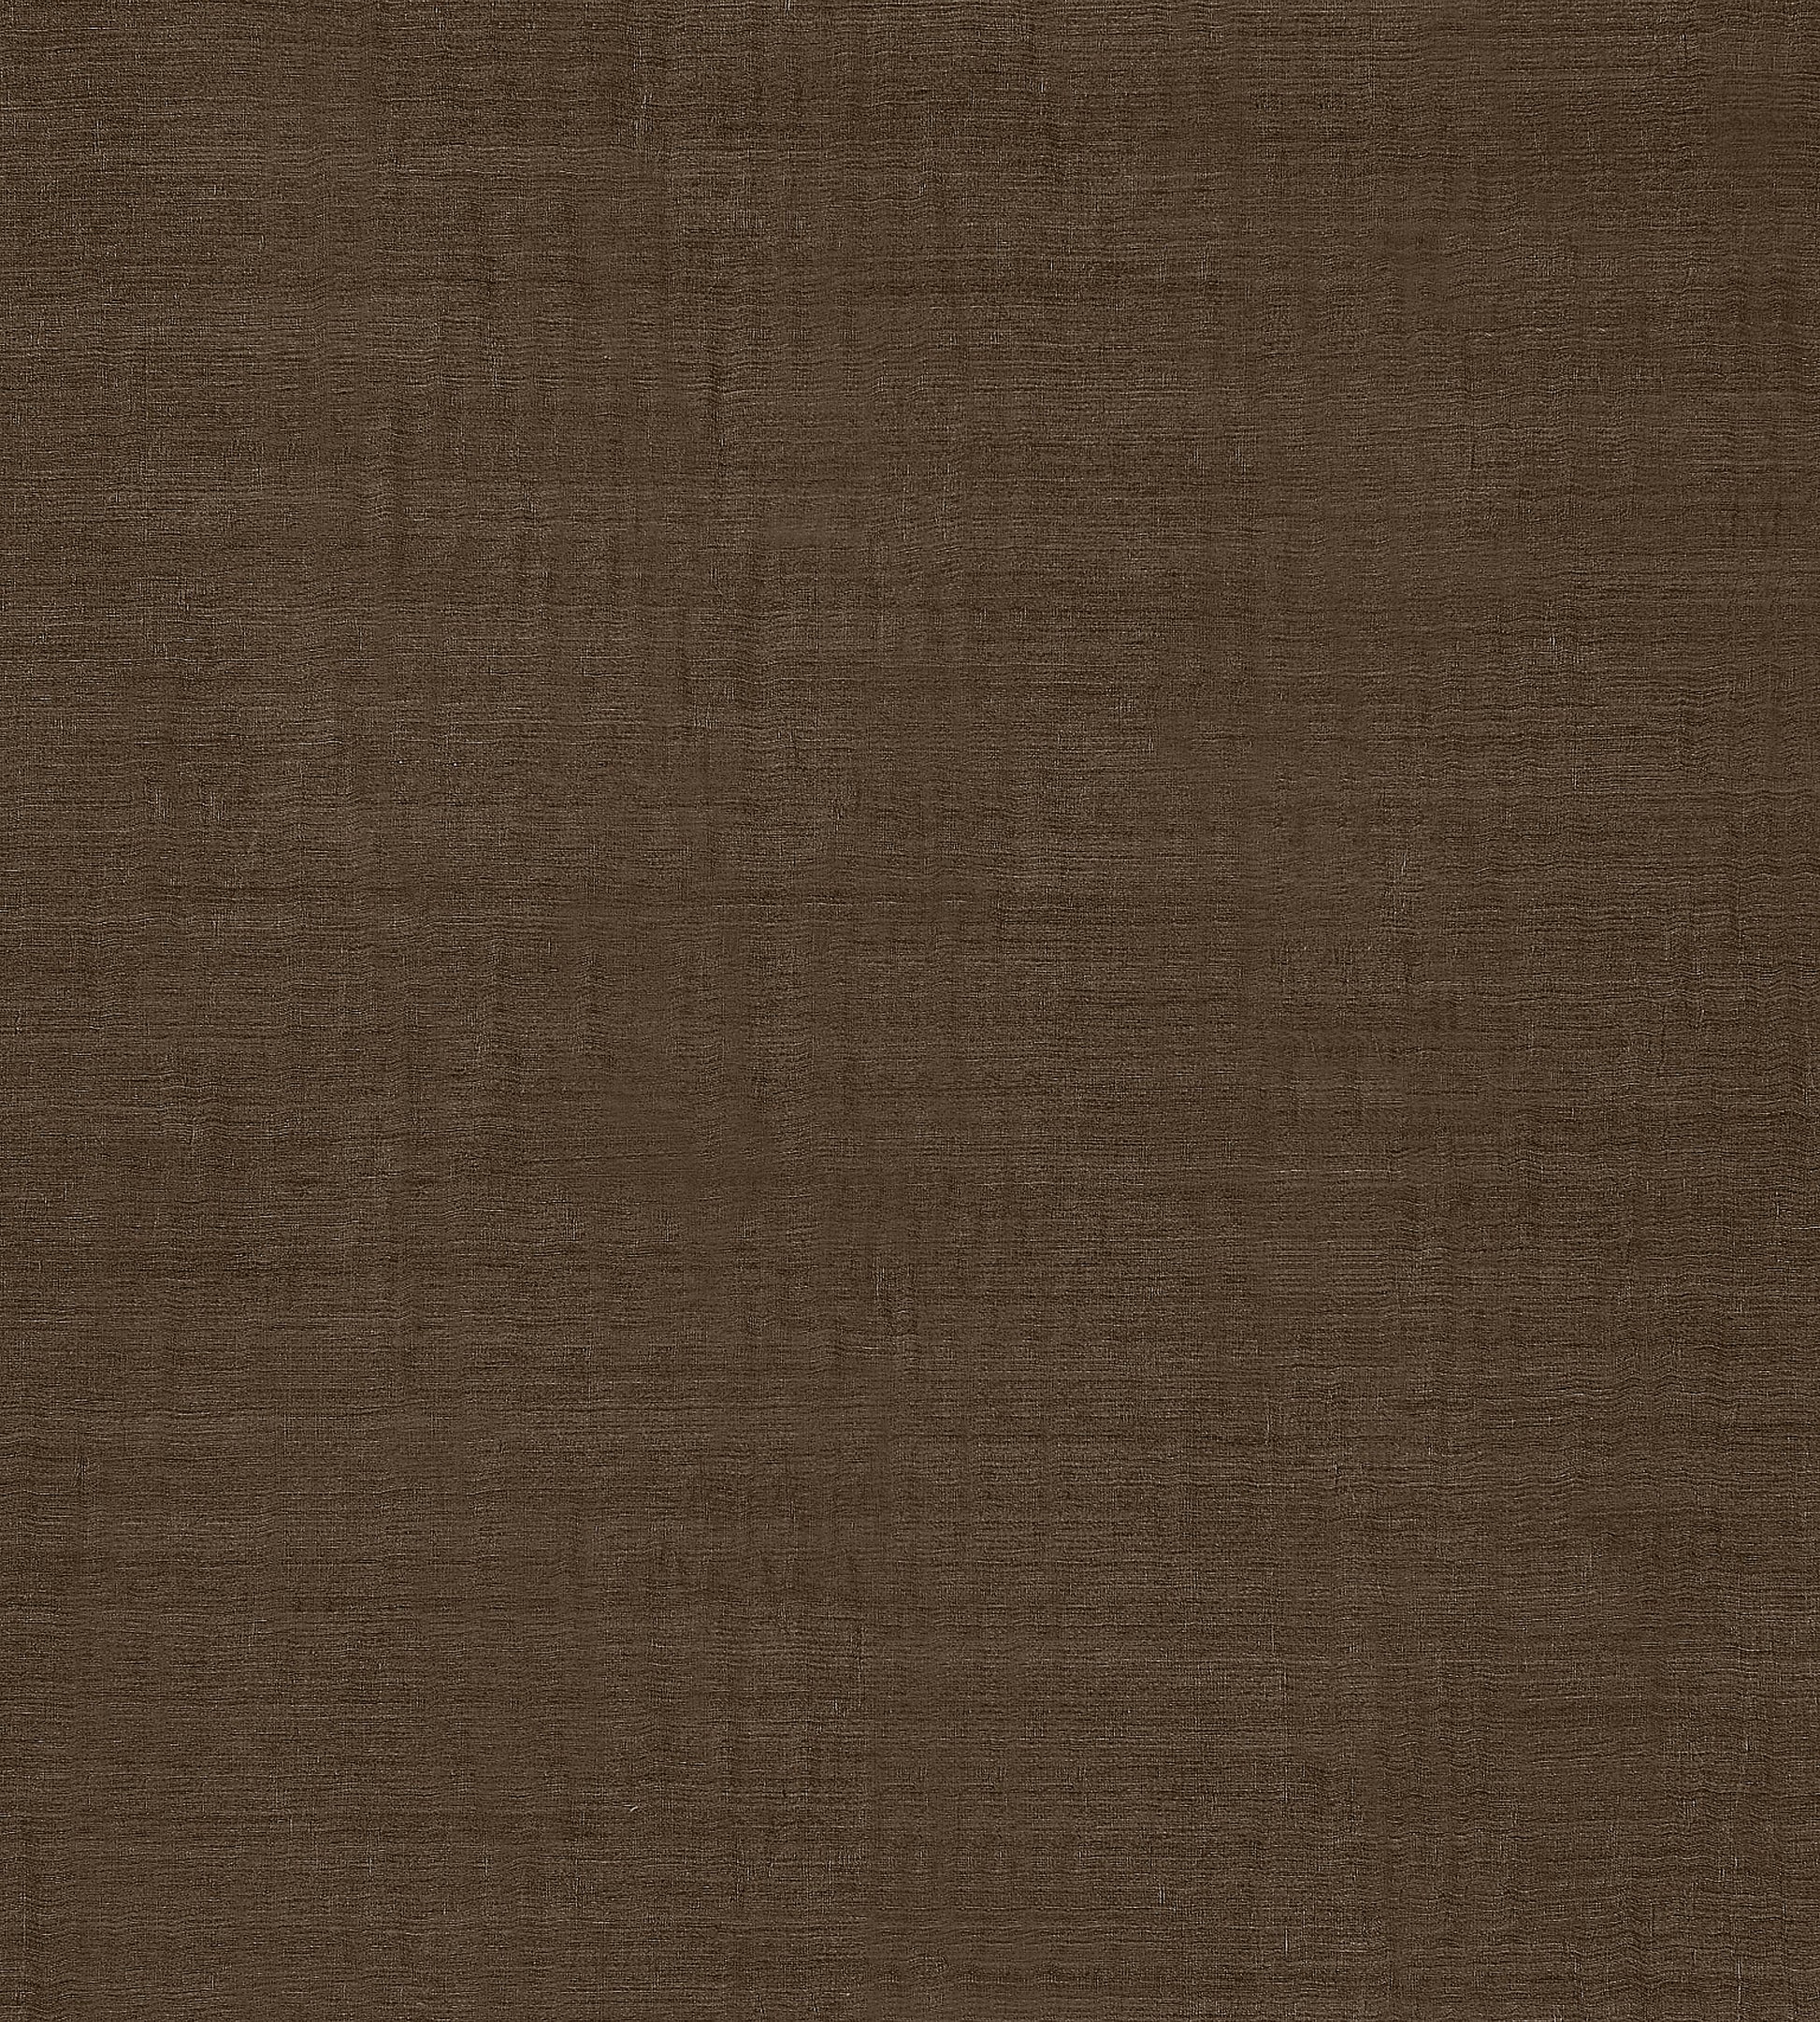 Purchase Scalamandre Wallpaper SKU WTT661508 pattern name  Crafty Deformation color name Chocolate. 